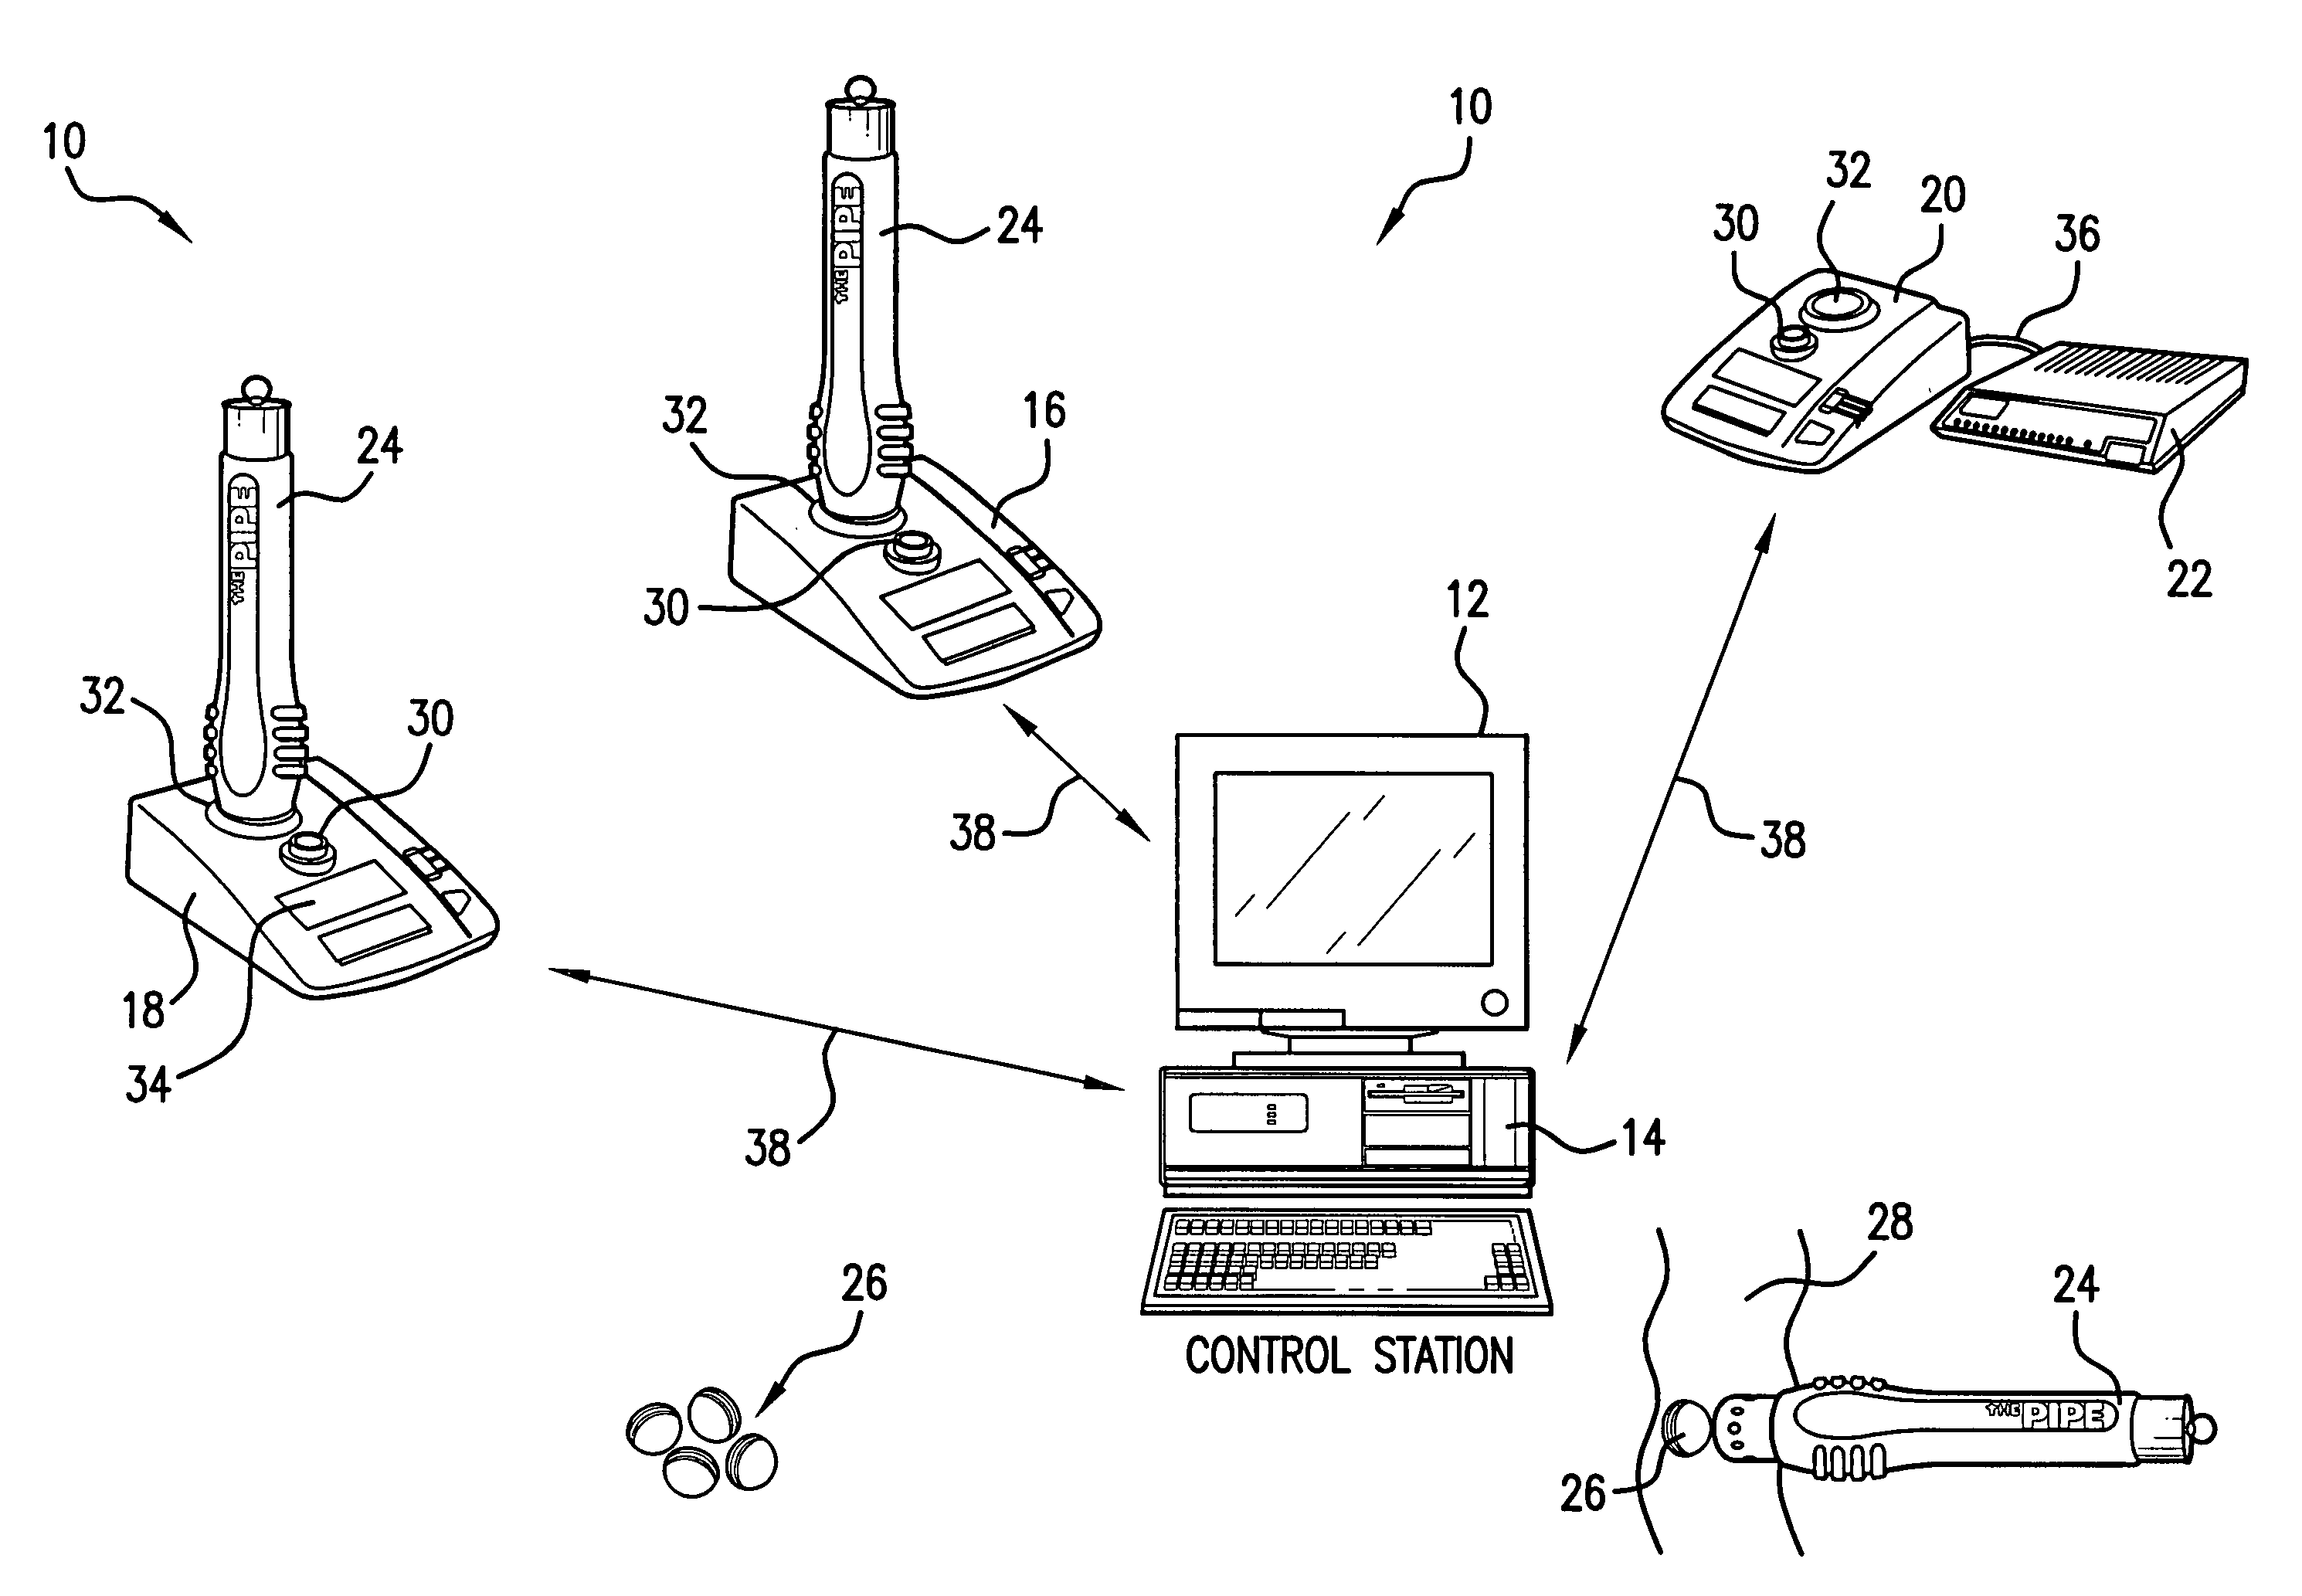 Guard tour system incorporating a positioning system